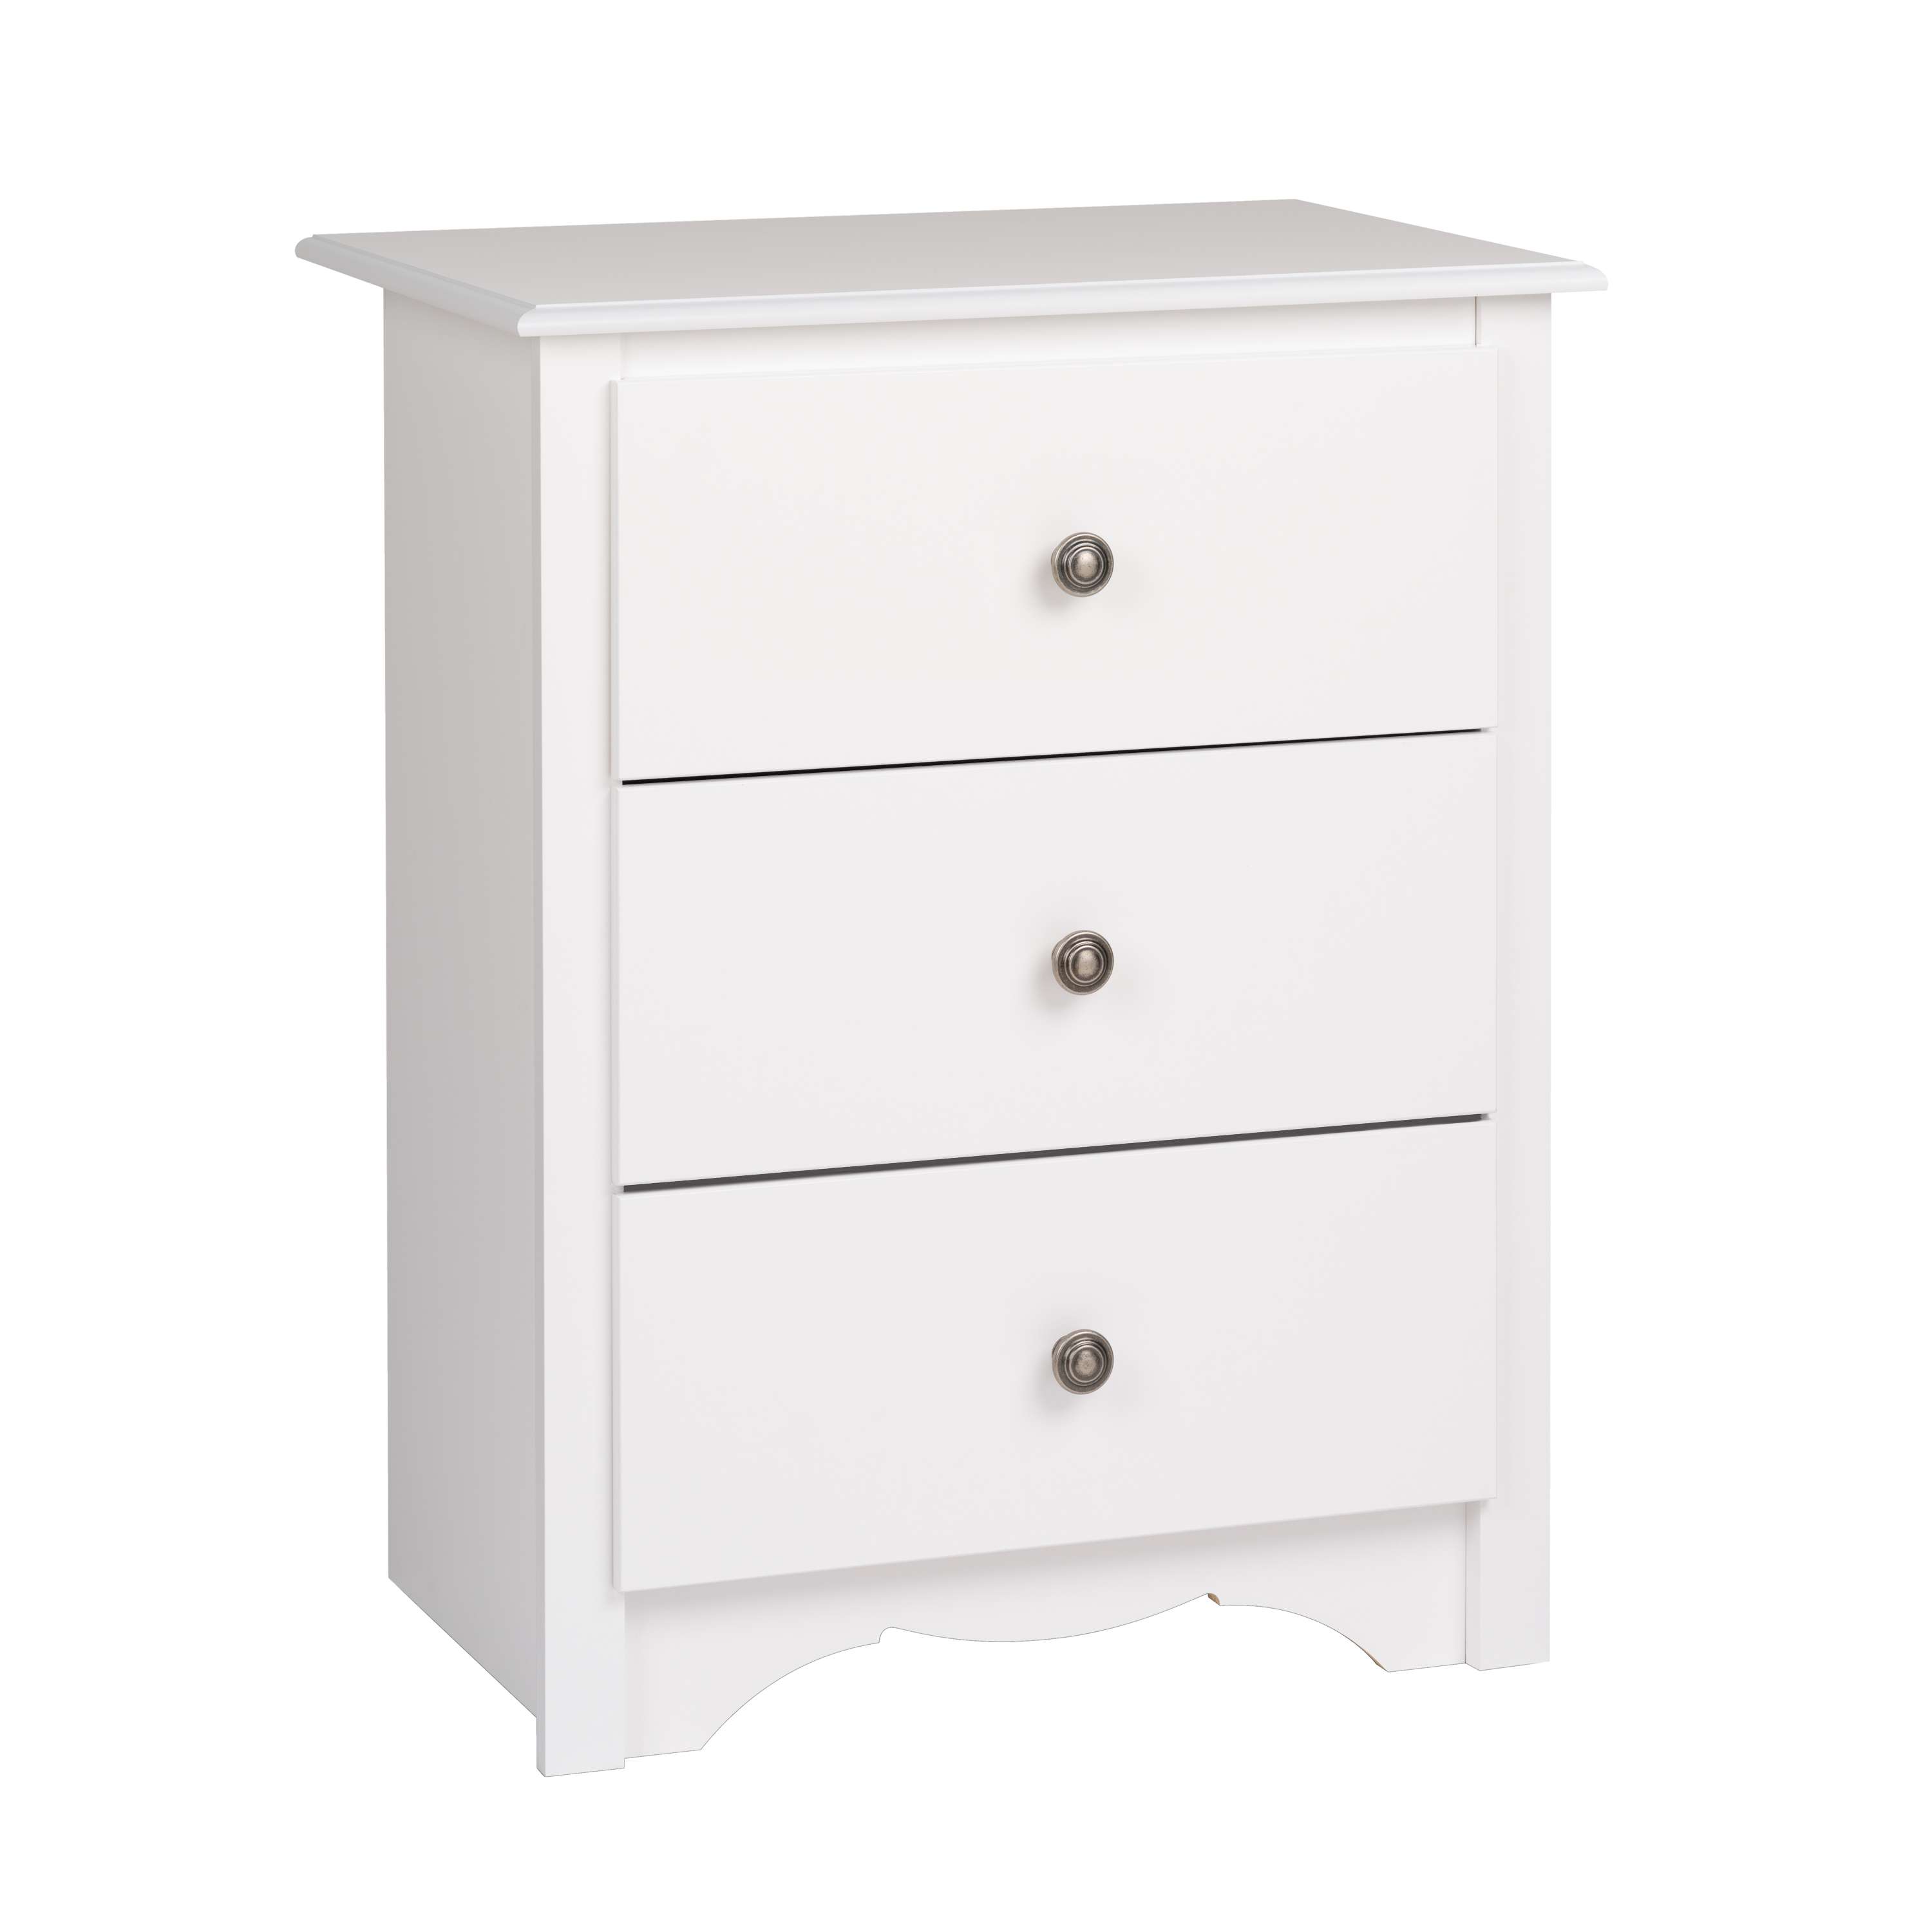 prepac monterey white drawer tall nightstand reviews goedekers wdc accent table low living room west elm marble console closet barn doors yellow decorative accessories little